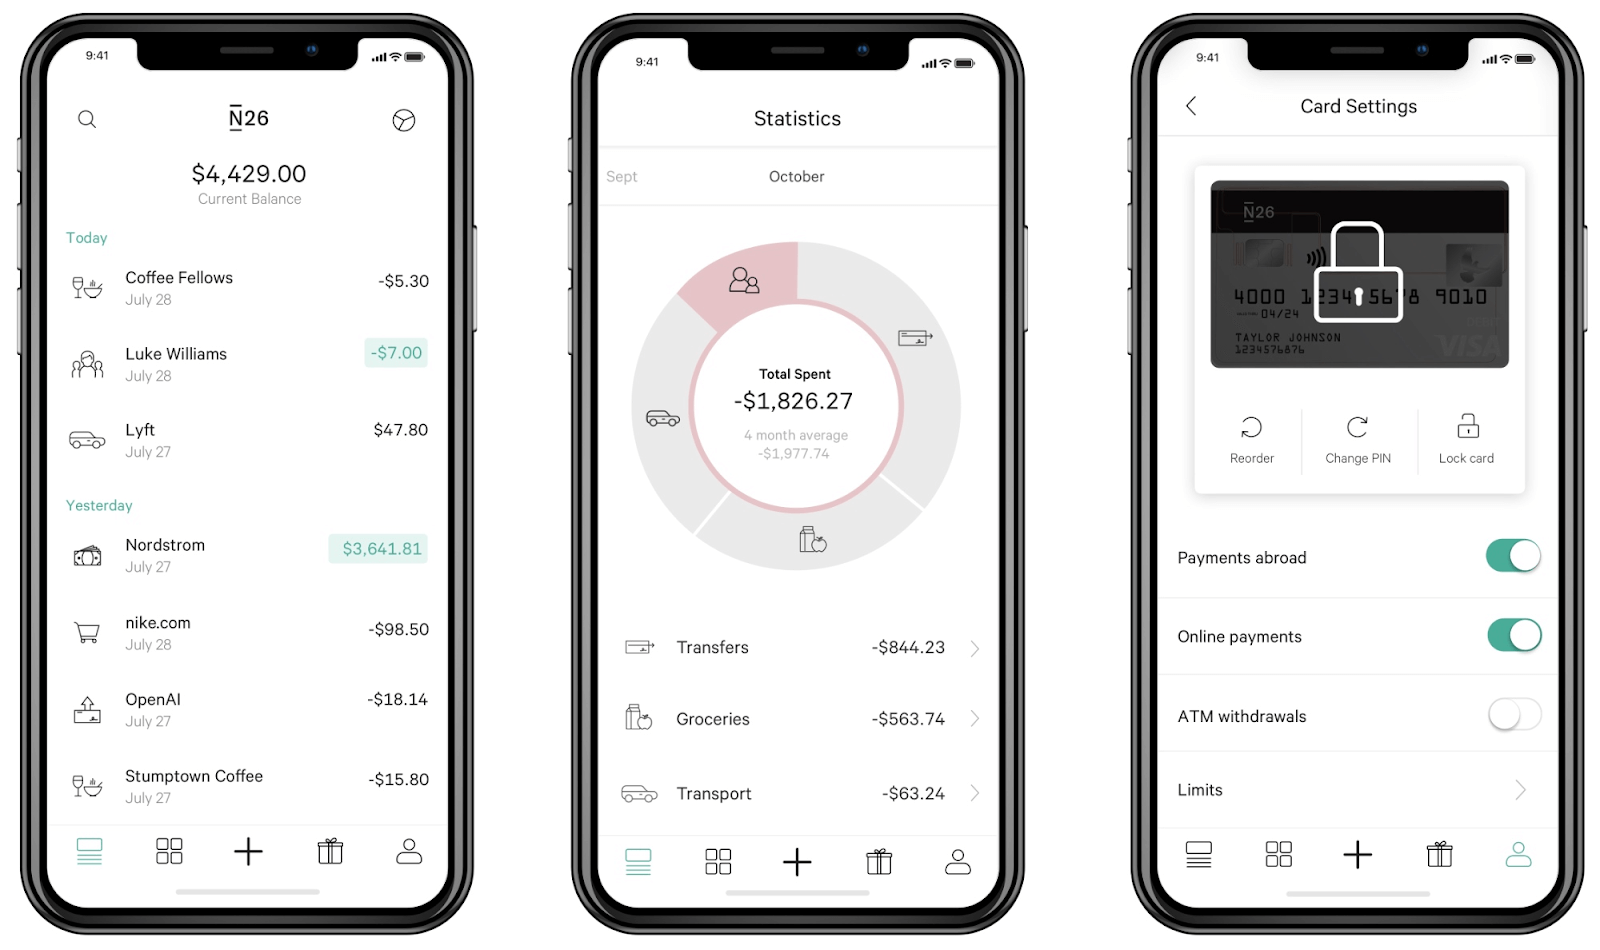 Viewing
transactions and card settings in N26.